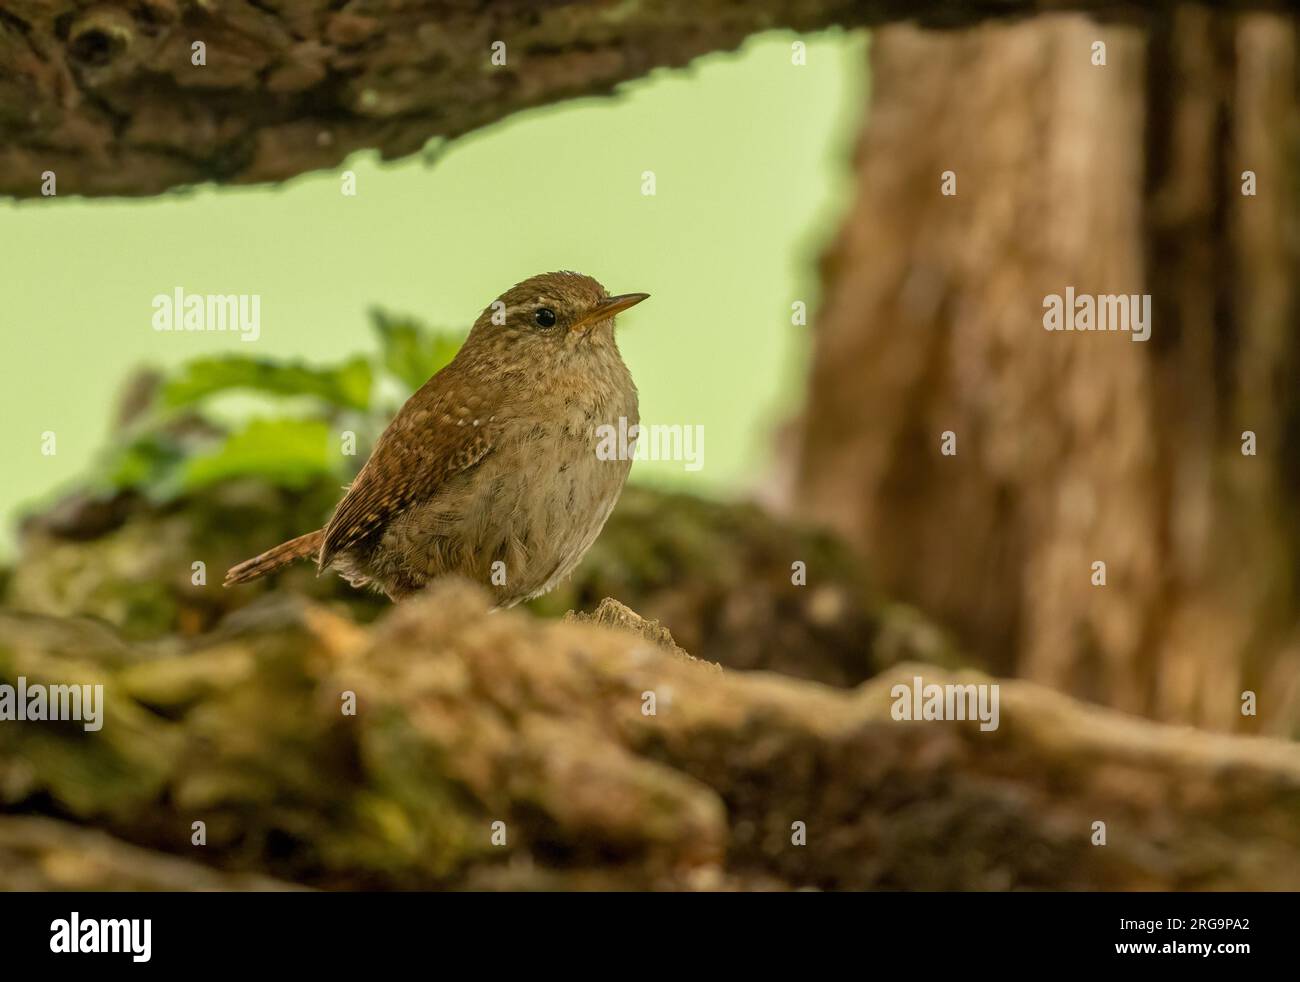 Tiny wren bird foraging for food around old tree trunks in the forest with natural background Stock Photo